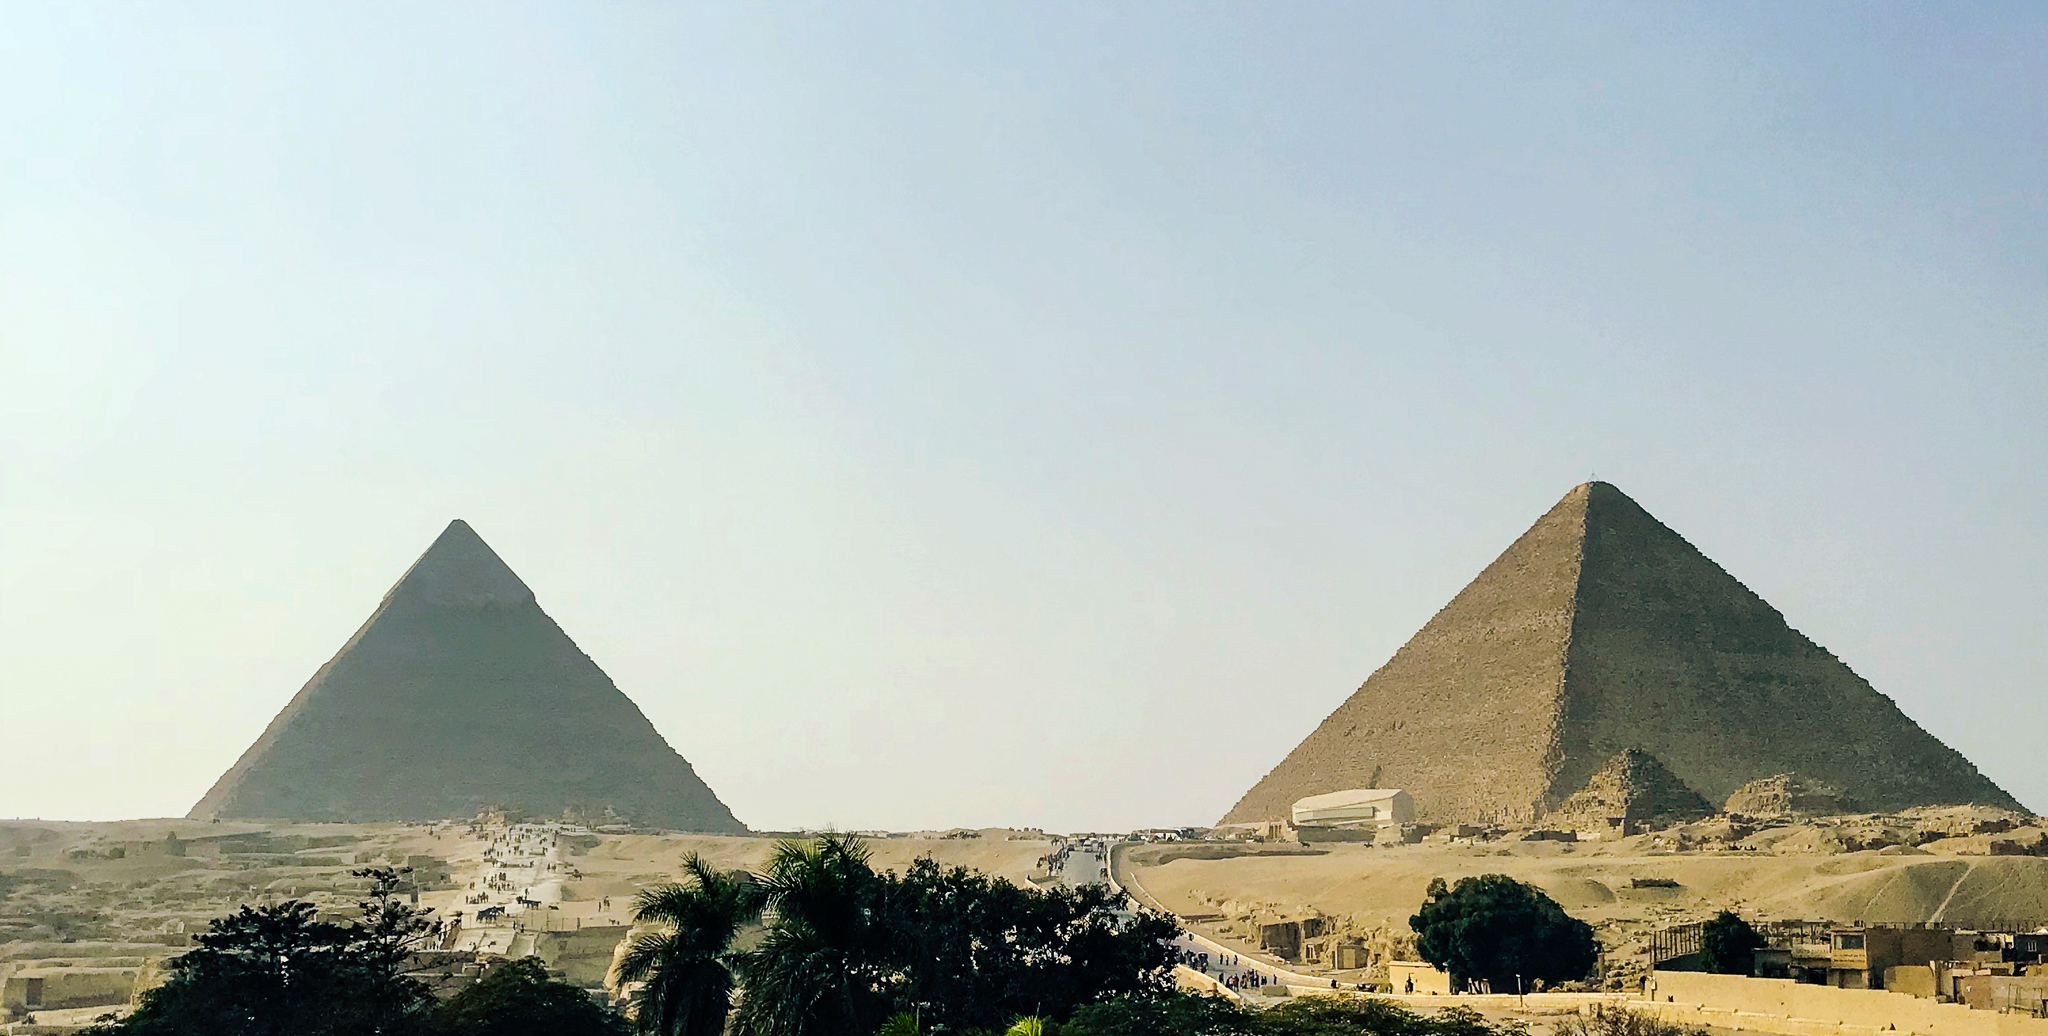 Mysteries of the Great Pyramid (Part 3 of 3: The King’s Chamber & Beyond)